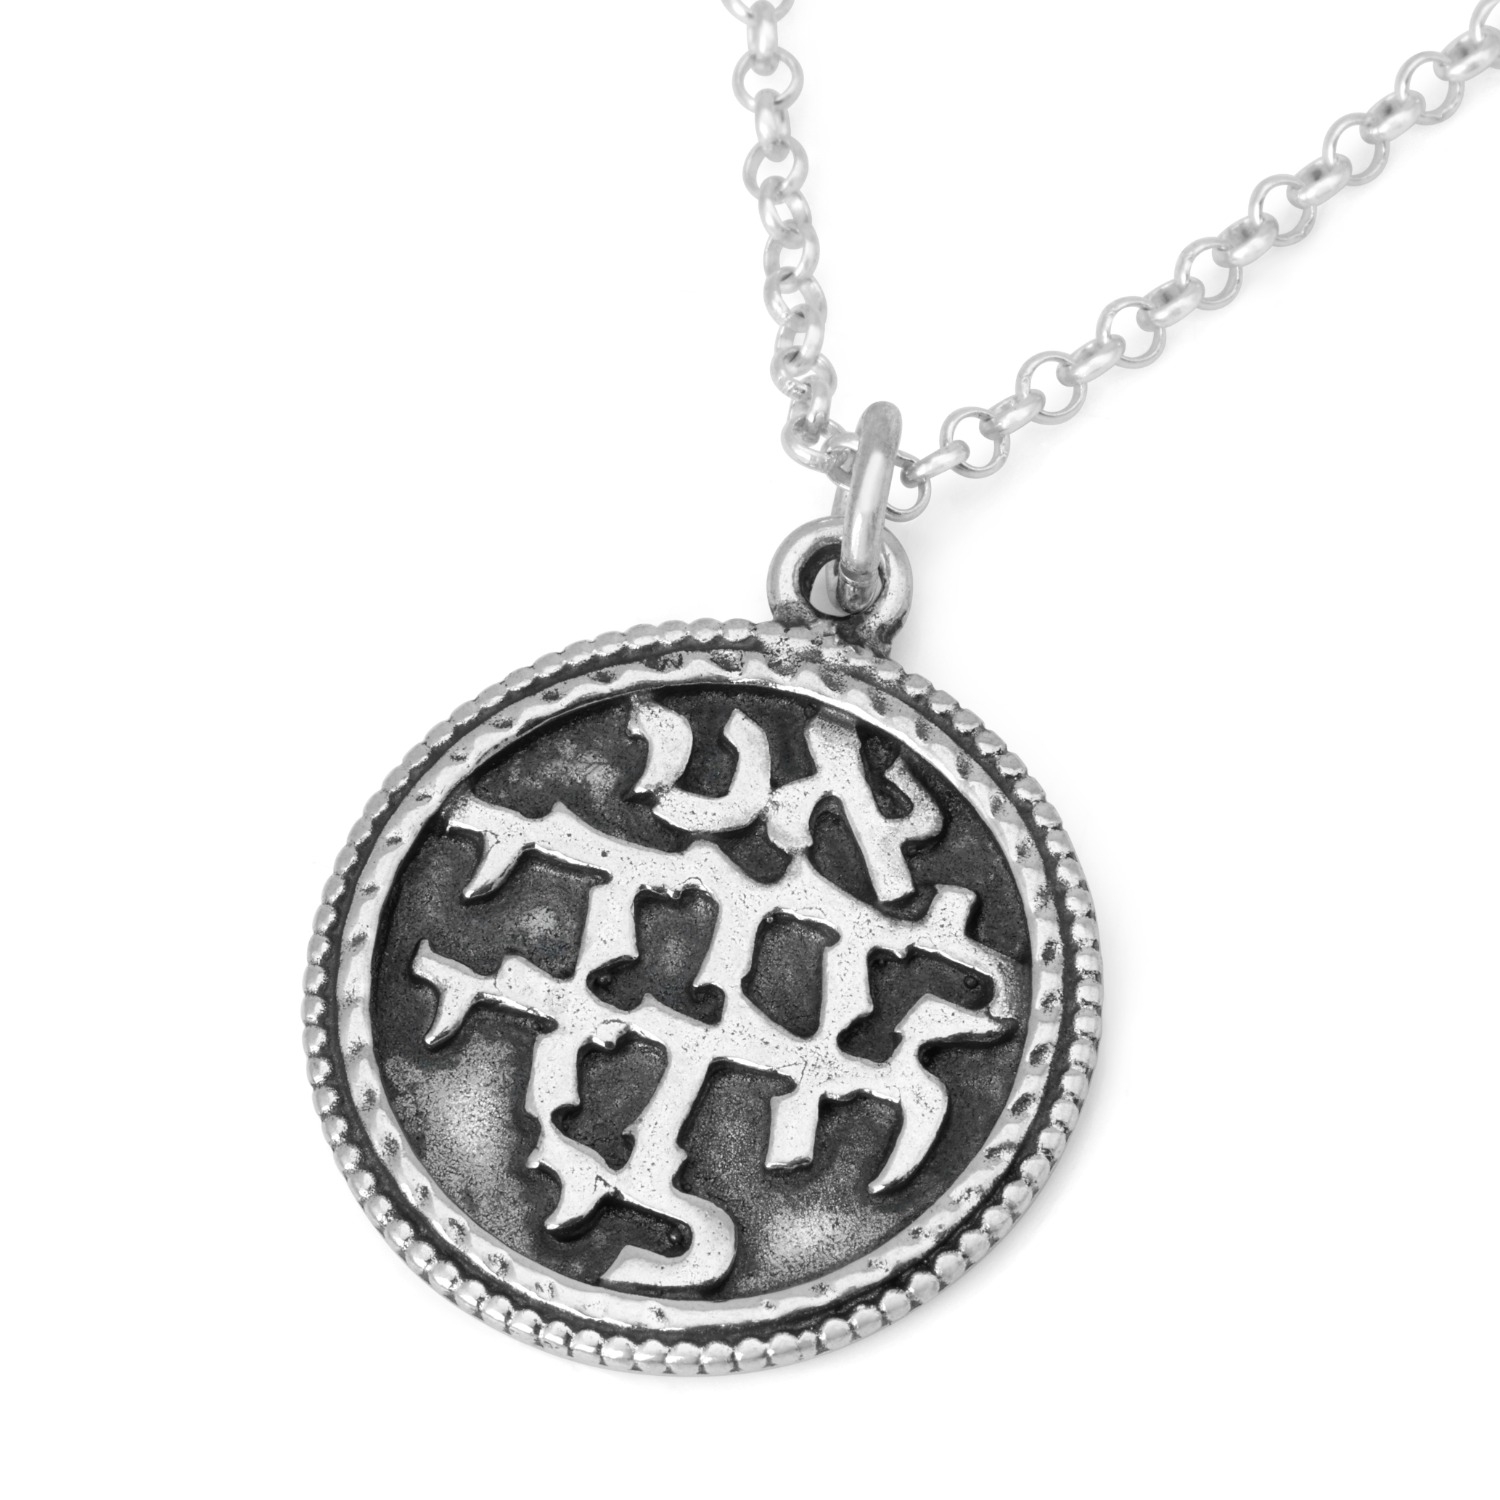 Beloved: Sterling Silver Round Necklace - Song of Songs 6:3 - 1